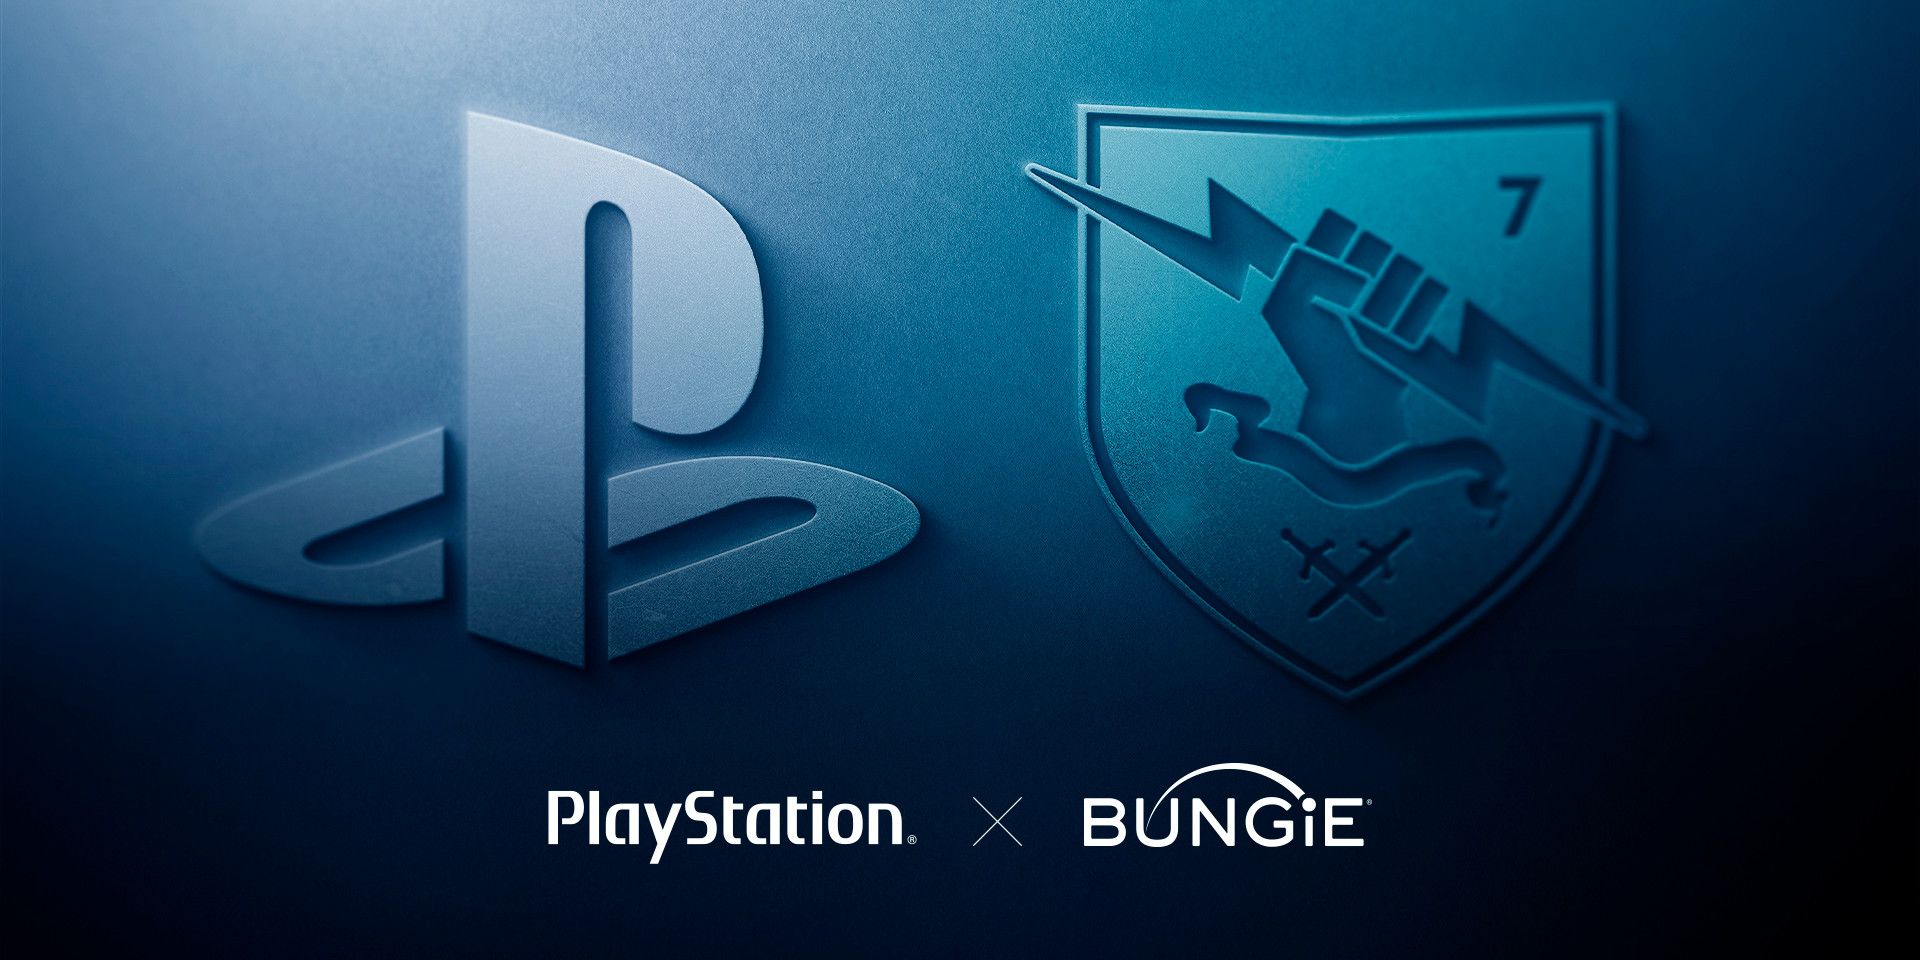 PlayStation Bungie Official Merger Image